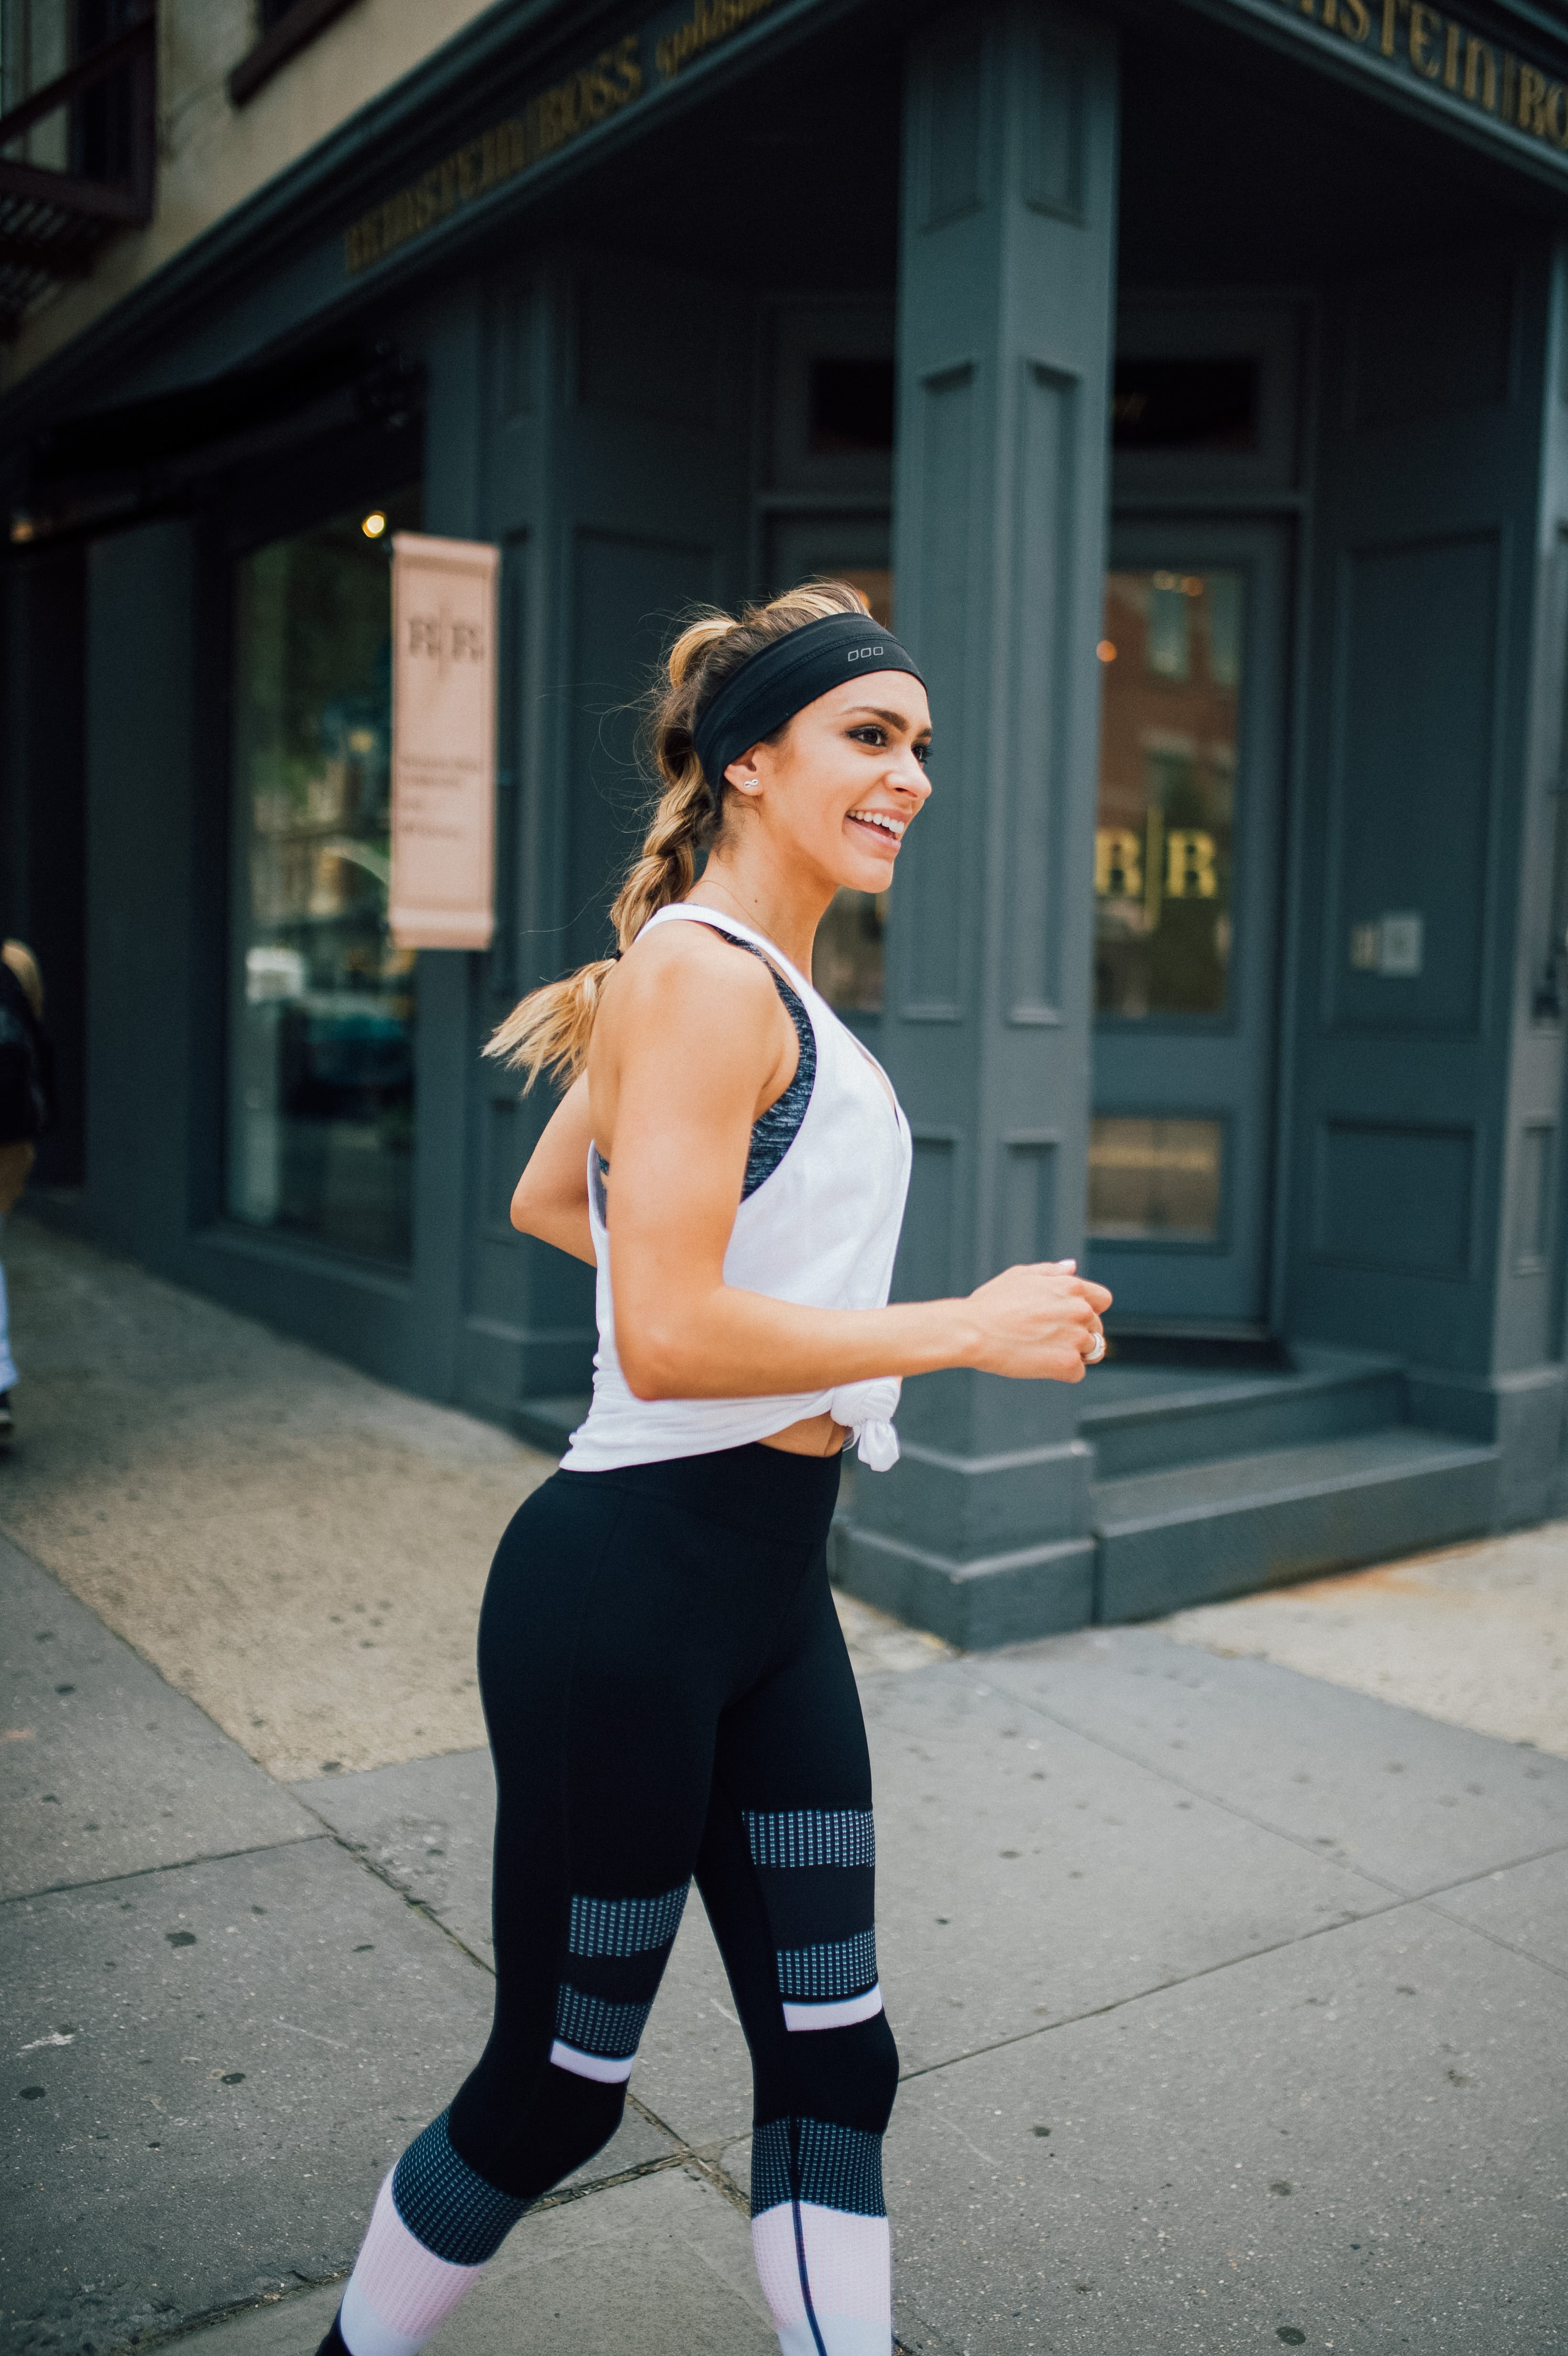 fitness fashion tsm the strong movement activewear athleirsure ailis garcia new york minute-48-min